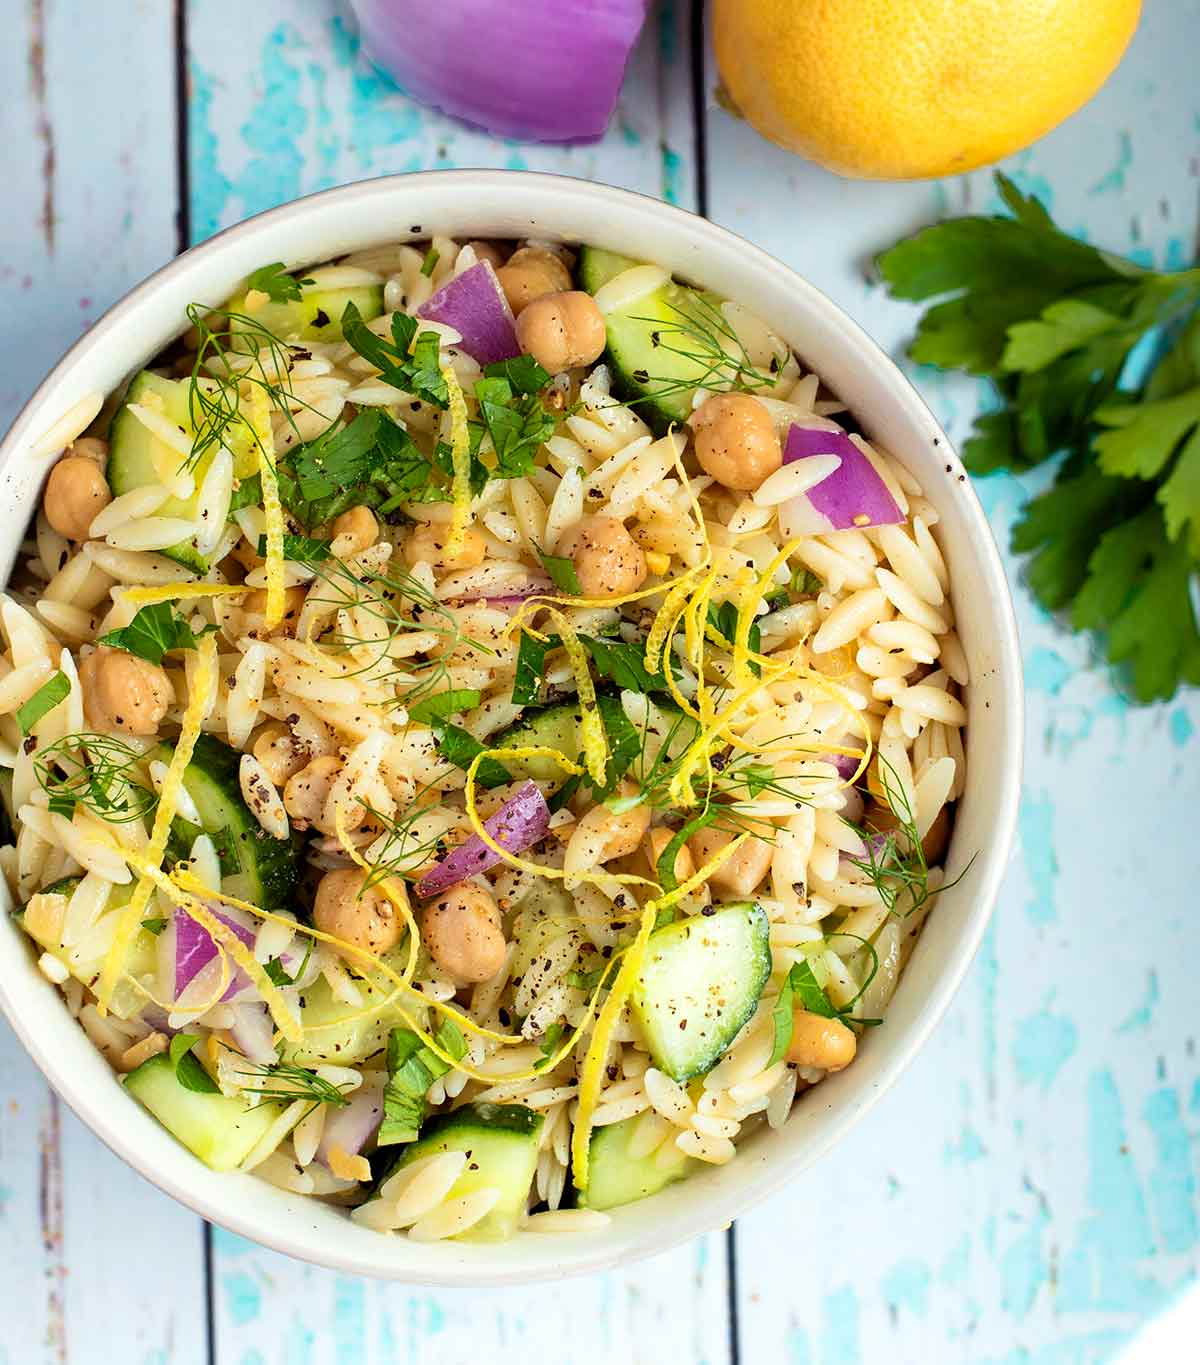 A white bowl filled with vegan chickpea and orzo salad with lemon zest garnish.